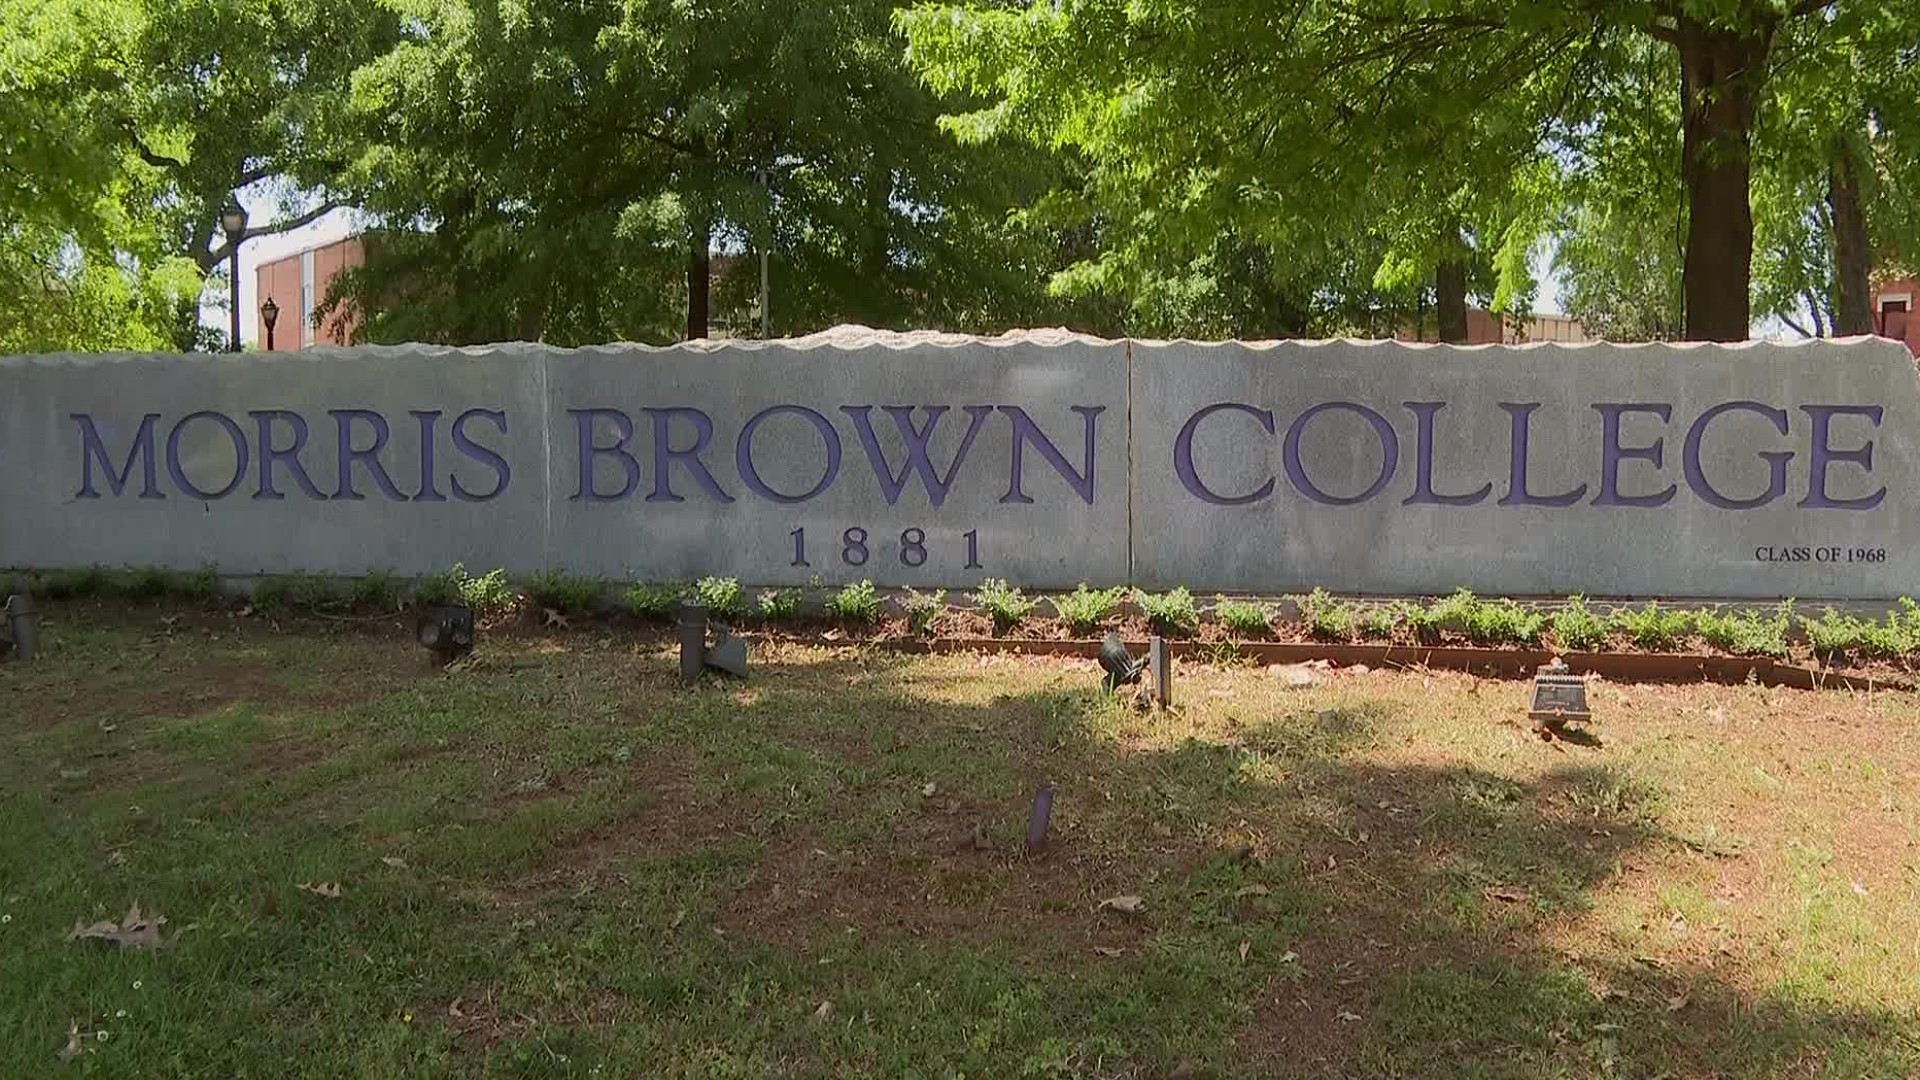 The Atlanta college says it's due to reports of positive COVID cases among students.